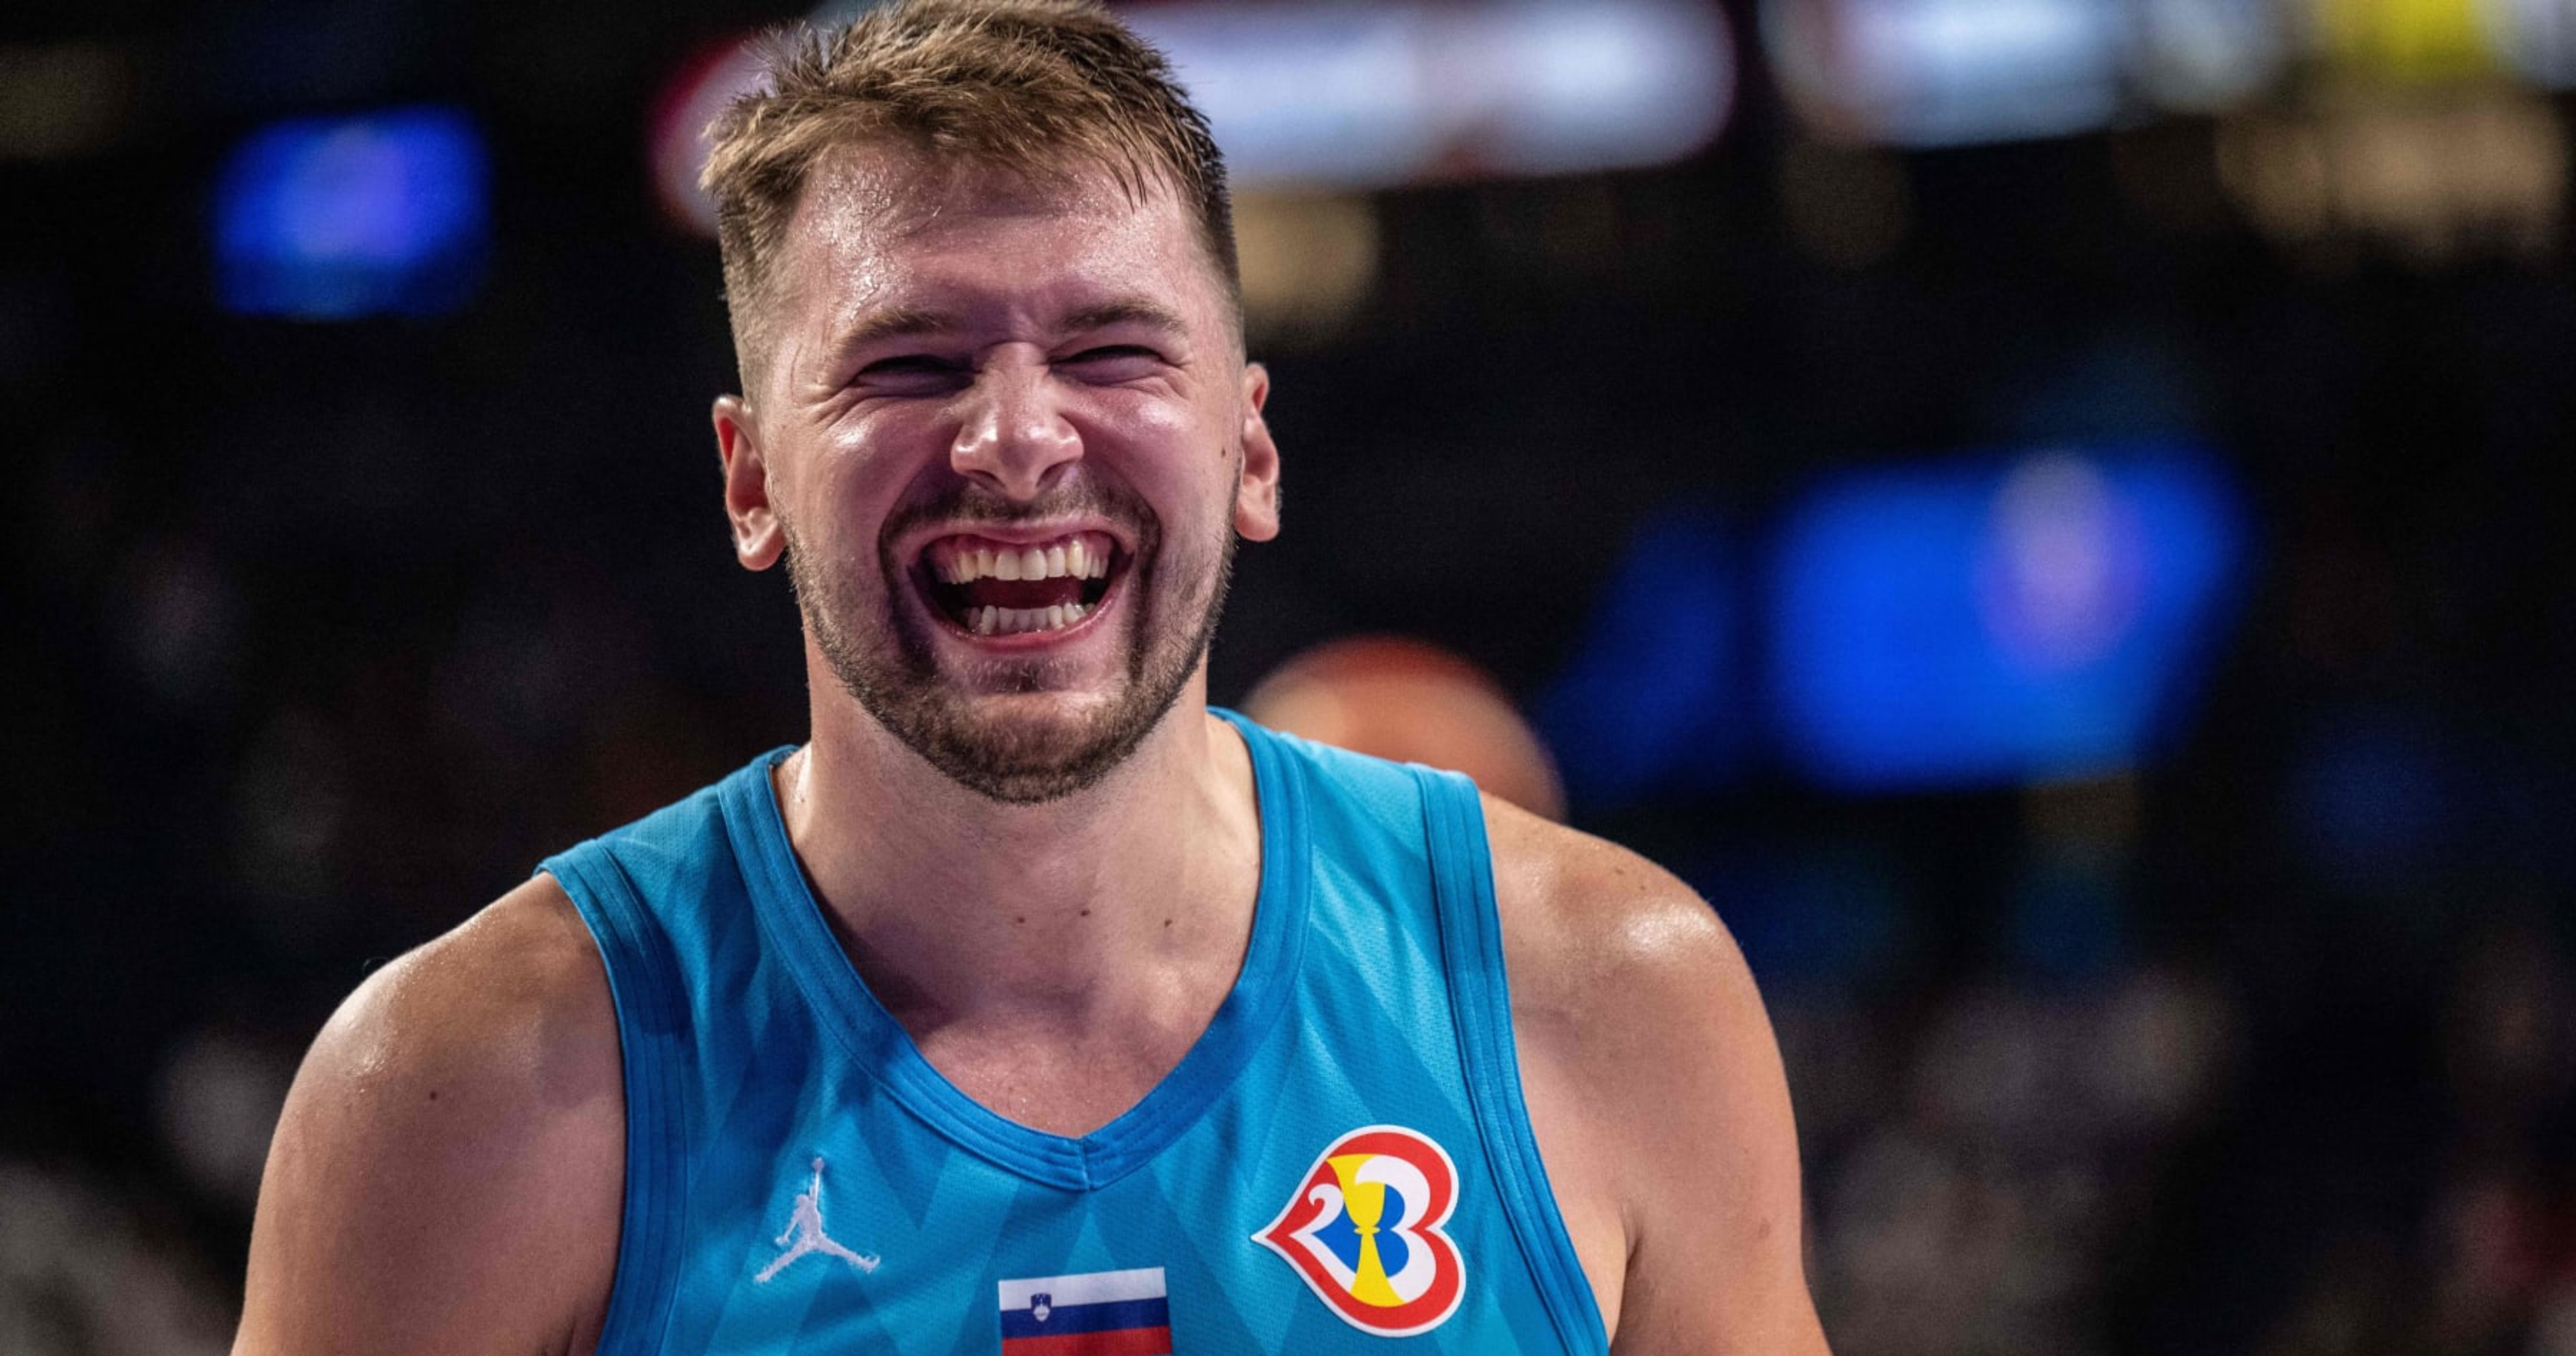 NBA Twitter reacts to Clippers loss vs. Mavs: 'Luka Doncic's annual